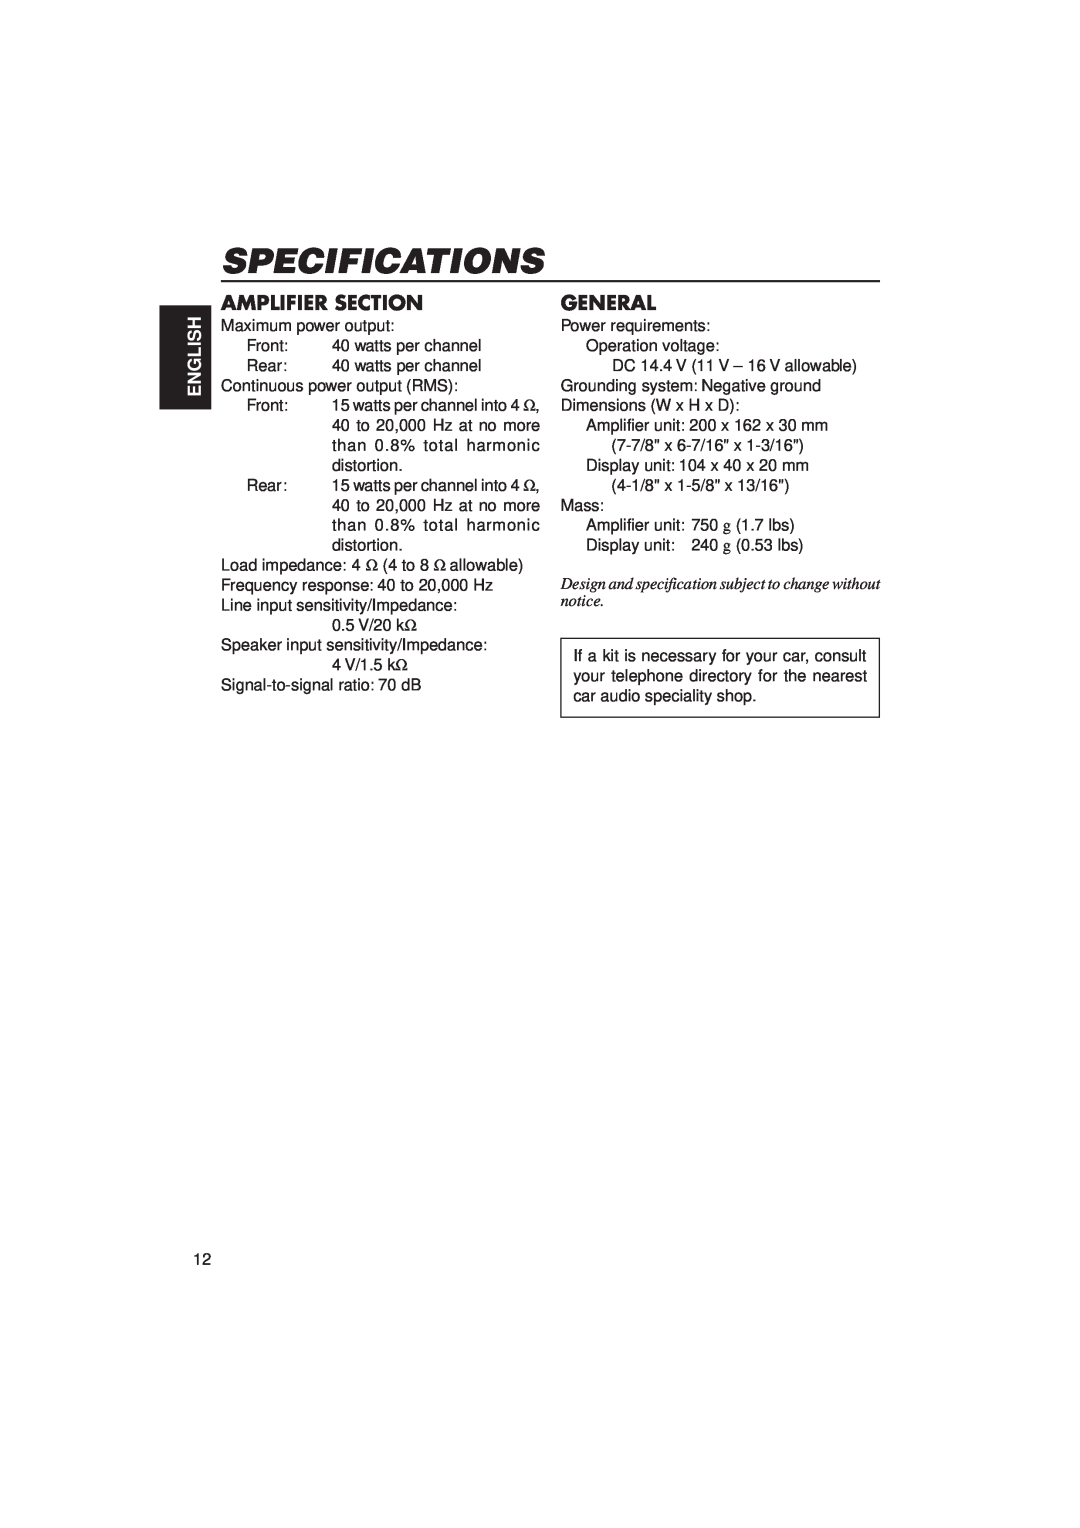 JVC KV-RA2 manual Specifications, Amplifier Section, General, English 